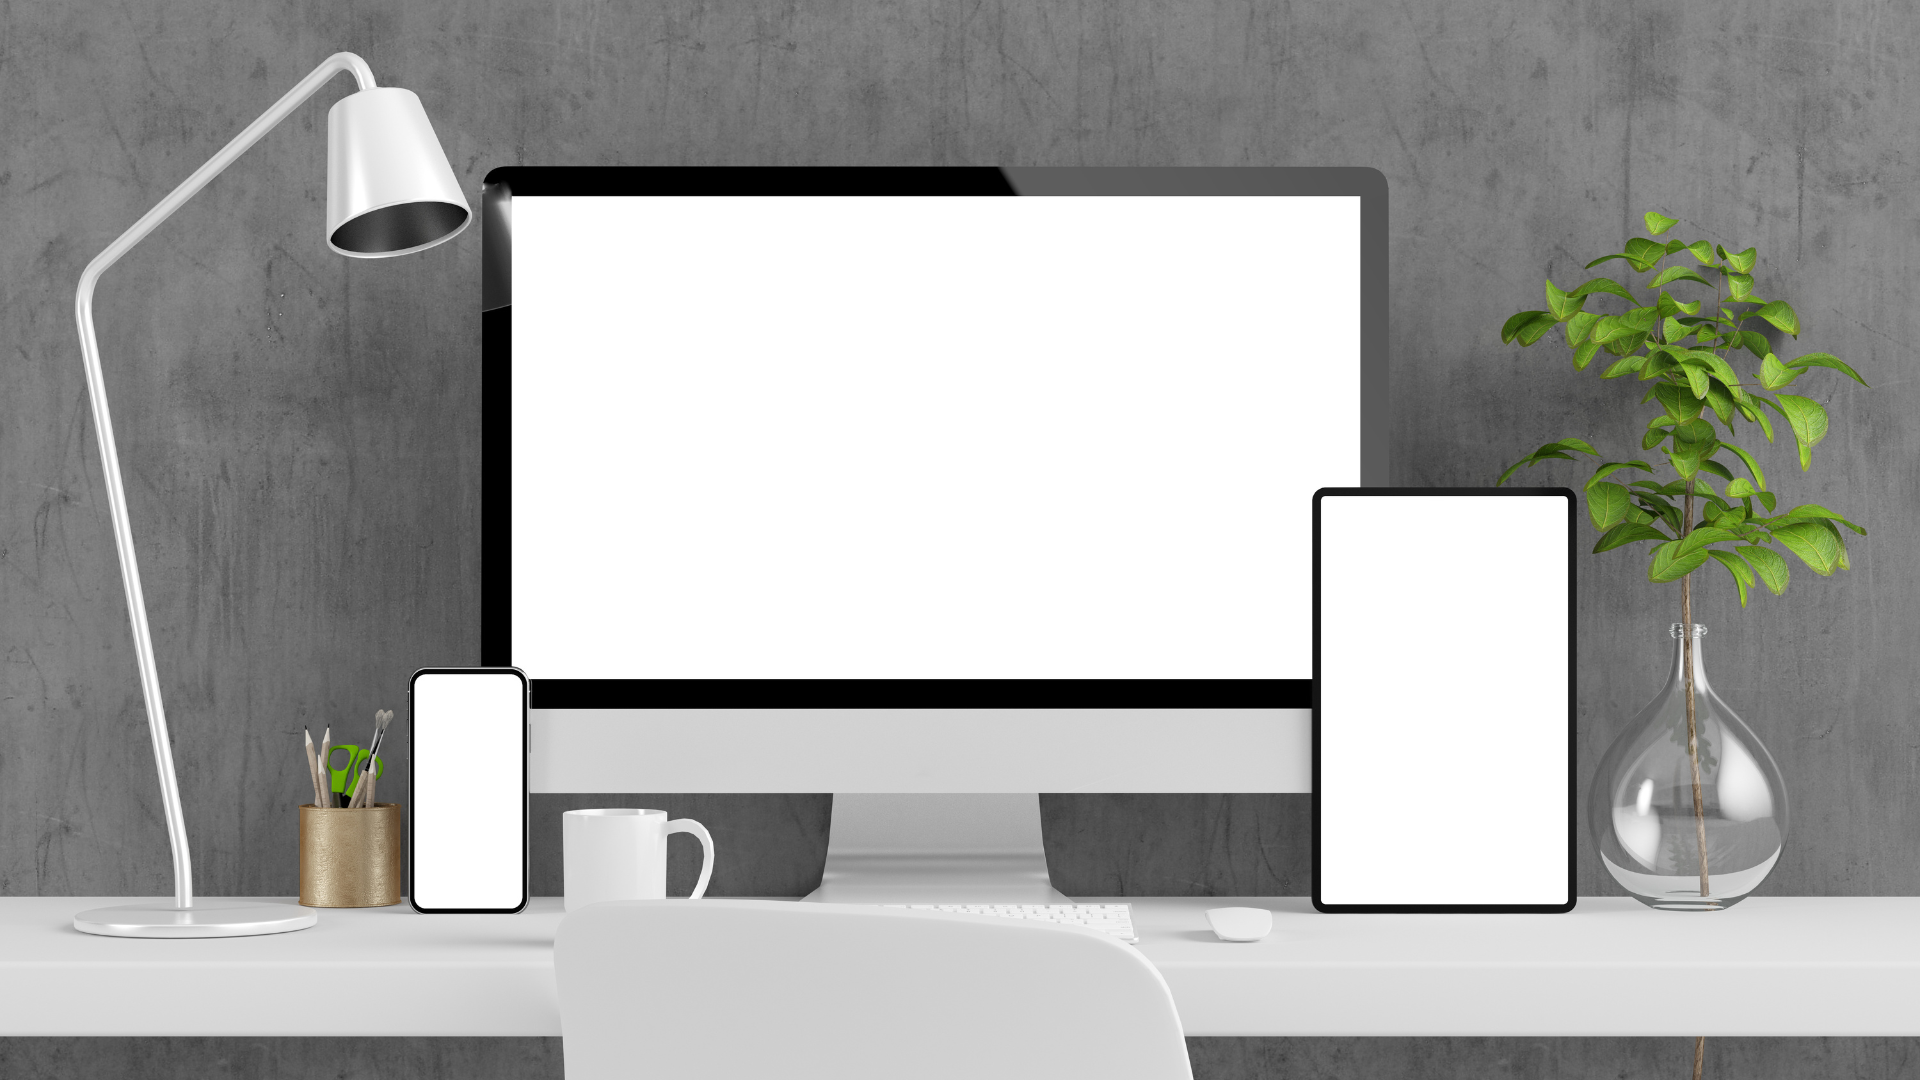 An image showcasing a desktop computer, tablet, and smartphone placed on a desk for the web design section of Rawlings Media's website. The devices have blank white screens, symbolizing the versatility and expertise of Rawlings Media in designing responsive and visually appealing websites across various devices.